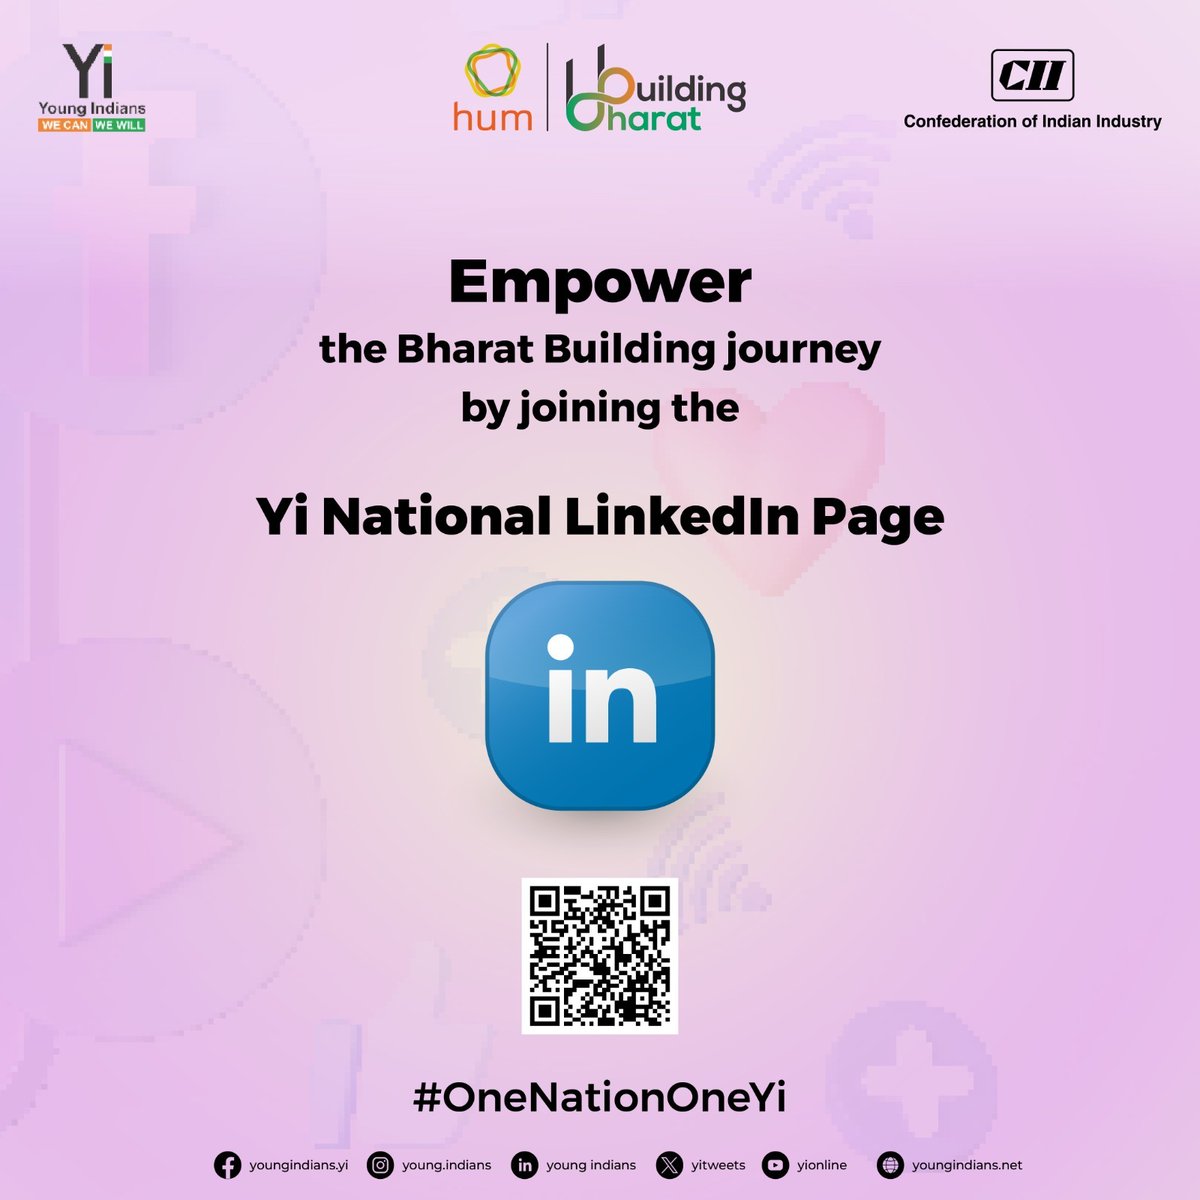 Unite in Yi's mission towards #BuildingBharat through the Yi National LinkedIn Handle. Join today to connect with industry leaders, innovators, and changemakers. #Yi #Cii #YoungIndians #YiNational #newLeadership #NationBuilding #ThoughtLeadership #YouthLeadership #HUM